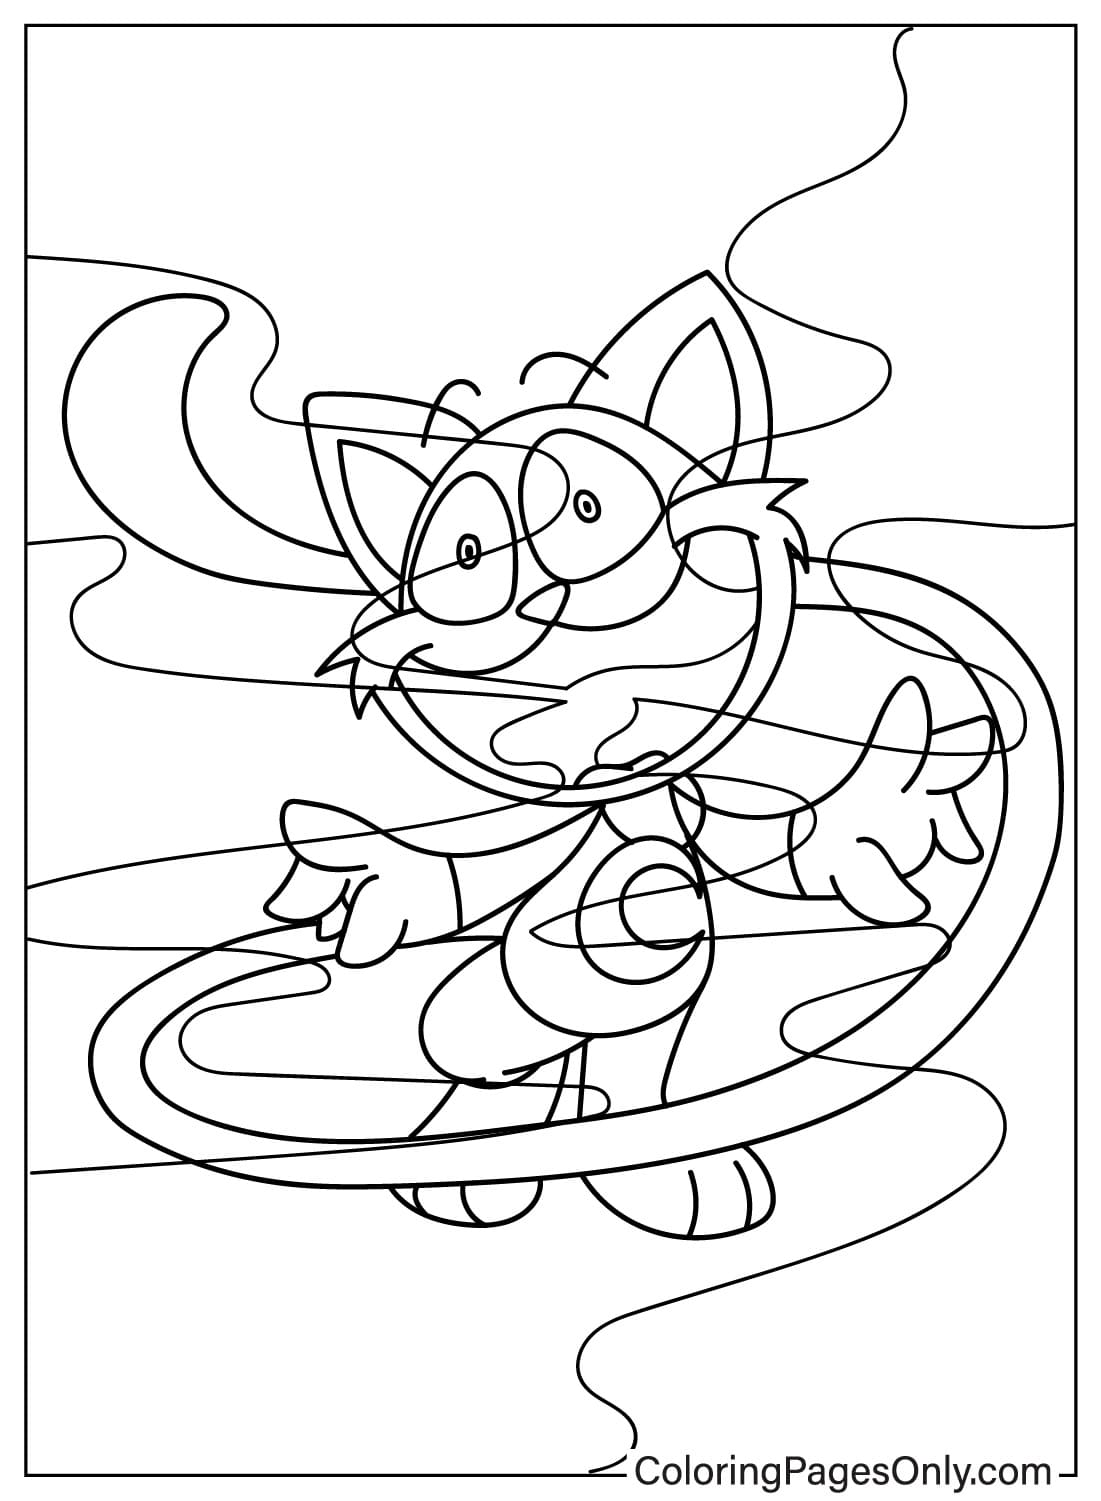 CatNap Free Coloring Page from CatNap